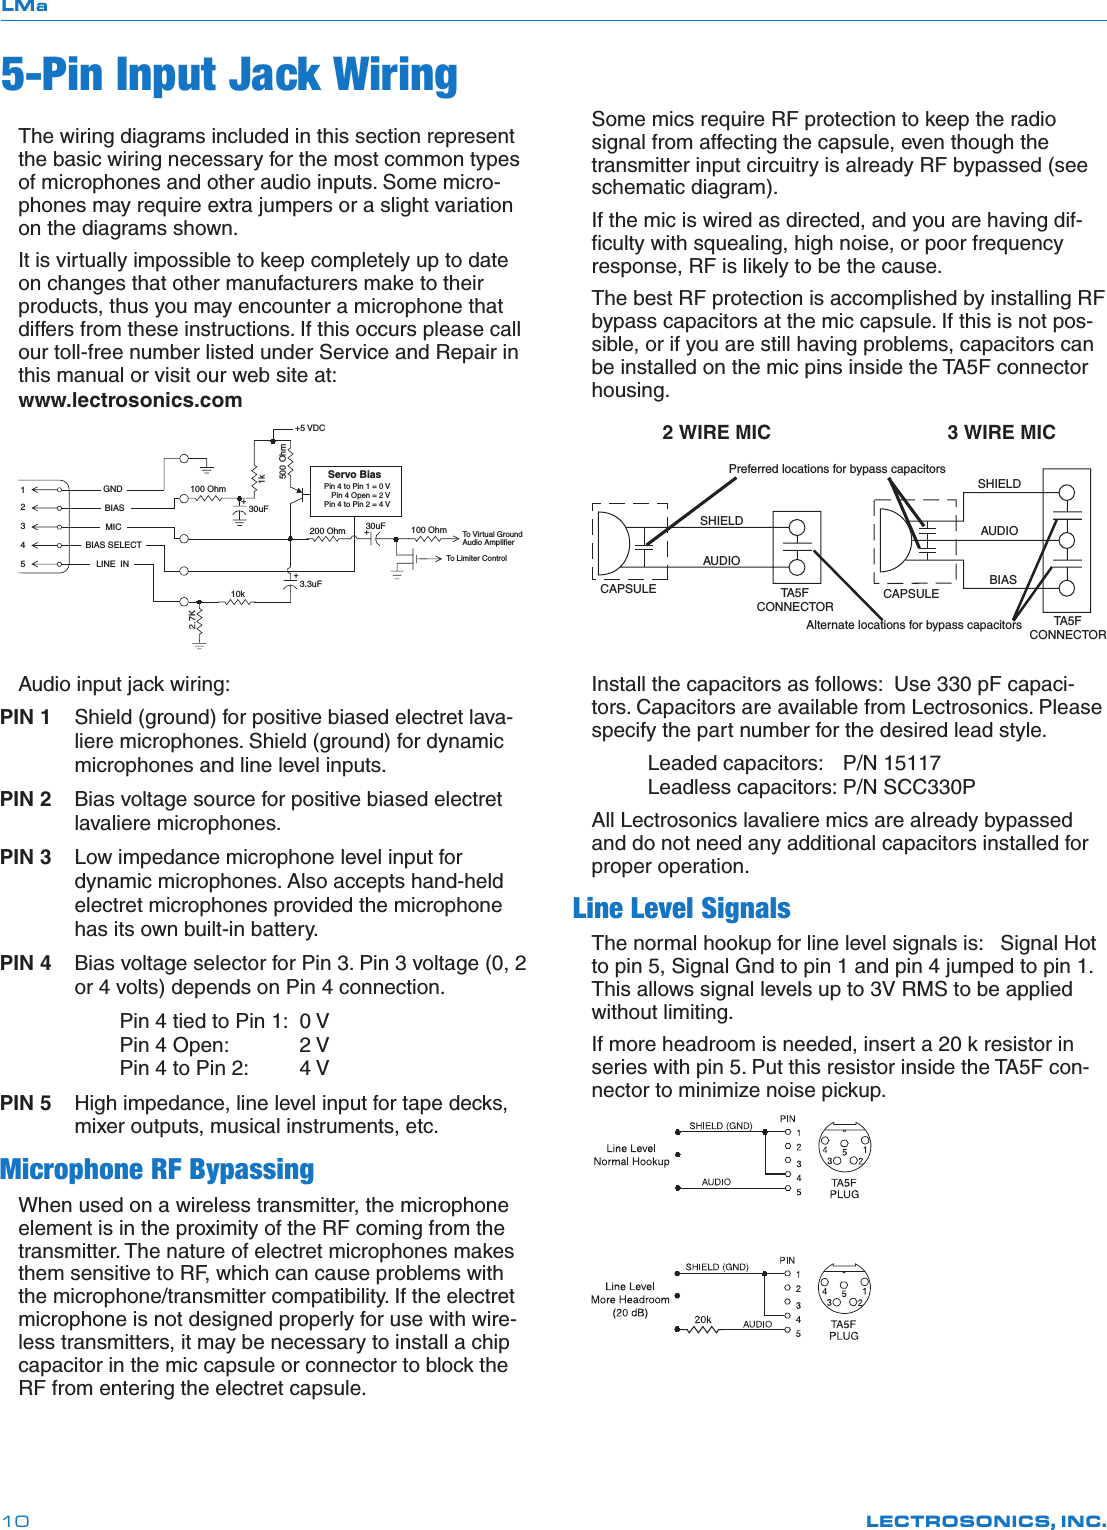 LMaLECTROSONICS, INC.10The wiring diagrams included in this section represent the basic wiring necessary for the most common types of microphones and other audio inputs. Some micro-phones may require extra jumpers or a slight variation on the diagrams shown.It is virtually impossible to keep completely up to date on changes that other manufacturers make to their products, thus you may encounter a microphone that differs from these instructions. If this occurs please call our toll-free number listed under Service and Repair in this manual or visit our web site at:  www.lectrosonics.com10k1k54321To  Virtual GroundAudio AmplifierBIASMICBIAS SELECTLINE  INGND+30uF+5 VDCServo BiasPin 4 to Pin 1 = 0 V  Pin 4 Open = 2 VPin 4 to Pin 2 = 4 V+To  Limiter Control30uF500 Ohm100 Ohm2.7K200 Ohm+3.3uF100 OhmAudio input jack wiring:PIN 1  Shield (ground) for positive biased electret lava-liere microphones. Shield (ground) for dynamic microphones and line level inputs.PIN 2  Bias voltage source for positive biased electret lavaliere microphones.PIN 3  Low impedance microphone level input for dynamic microphones. Also accepts hand-held electret microphones provided the microphone has its own built-in battery.PIN 4  Bias voltage selector for Pin 3. Pin 3 voltage (0, 2 or 4 volts) depends on Pin 4 connection.Pin 4 tied to Pin 1:  0 VPin 4 Open:  2 VPin 4 to Pin 2:  4 VPIN 5  High impedance, line level input for tape decks, mixer outputs, musical instruments, etc.Microphone RF BypassingWhen used on a wireless transmitter, the microphone element is in the proximity of the RF coming from the transmitter. The nature of electret microphones makes them sensitive to RF, which can cause problems with the microphone/transmitter compatibility. If the electret microphone is not designed properly for use with wire-less transmitters, it may be necessary to install a chip capacitor in the mic capsule or connector to block the RF from entering the electret capsule.5-Pin Input Jack WiringSome mics require RF protection to keep the radio signal from affecting the capsule, even though the transmitter input circuitry is already RF bypassed (see schematic diagram).If the mic is wired as directed, and you are having dif-ﬁculty with squealing, high noise, or poor frequency response, RF is likely to be the cause.The best RF protection is accomplished by installing RF bypass capacitors at the mic capsule. If this is not pos-sible, or if you are still having problems, capacitors can be installed on the mic pins inside the TA5F connector housing.3 WIRE MIC2 WIRE MICCAPSULE CAPSULESHIELDAUDIOSHIELDAUDIOBIASAlternate locations for bypass capacitorsTA5FCONNECTORTA 5FCONNECTORPreferred locations for bypass capacitorsInstall the capacitors as follows:  Use 330 pF capaci-tors. Capacitors are available from Lectrosonics. Please specify the part number for the desired lead style.  Leaded capacitors:  P/N 15117     Leadless capacitors: P/N SCC330PAll Lectrosonics lavaliere mics are already bypassed and do not need any additional capacitors installed for proper operation.Line Level SignalsThe normal hookup for line level signals is:   Signal Hot to pin 5, Signal Gnd to pin 1 and pin 4 jumped to pin 1. This allows signal levels up to 3V RMS to be applied without limiting.If more headroom is needed, insert a 20 k resistor in series with pin 5. Put this resistor inside the TA5F con-nector to minimize noise pickup.